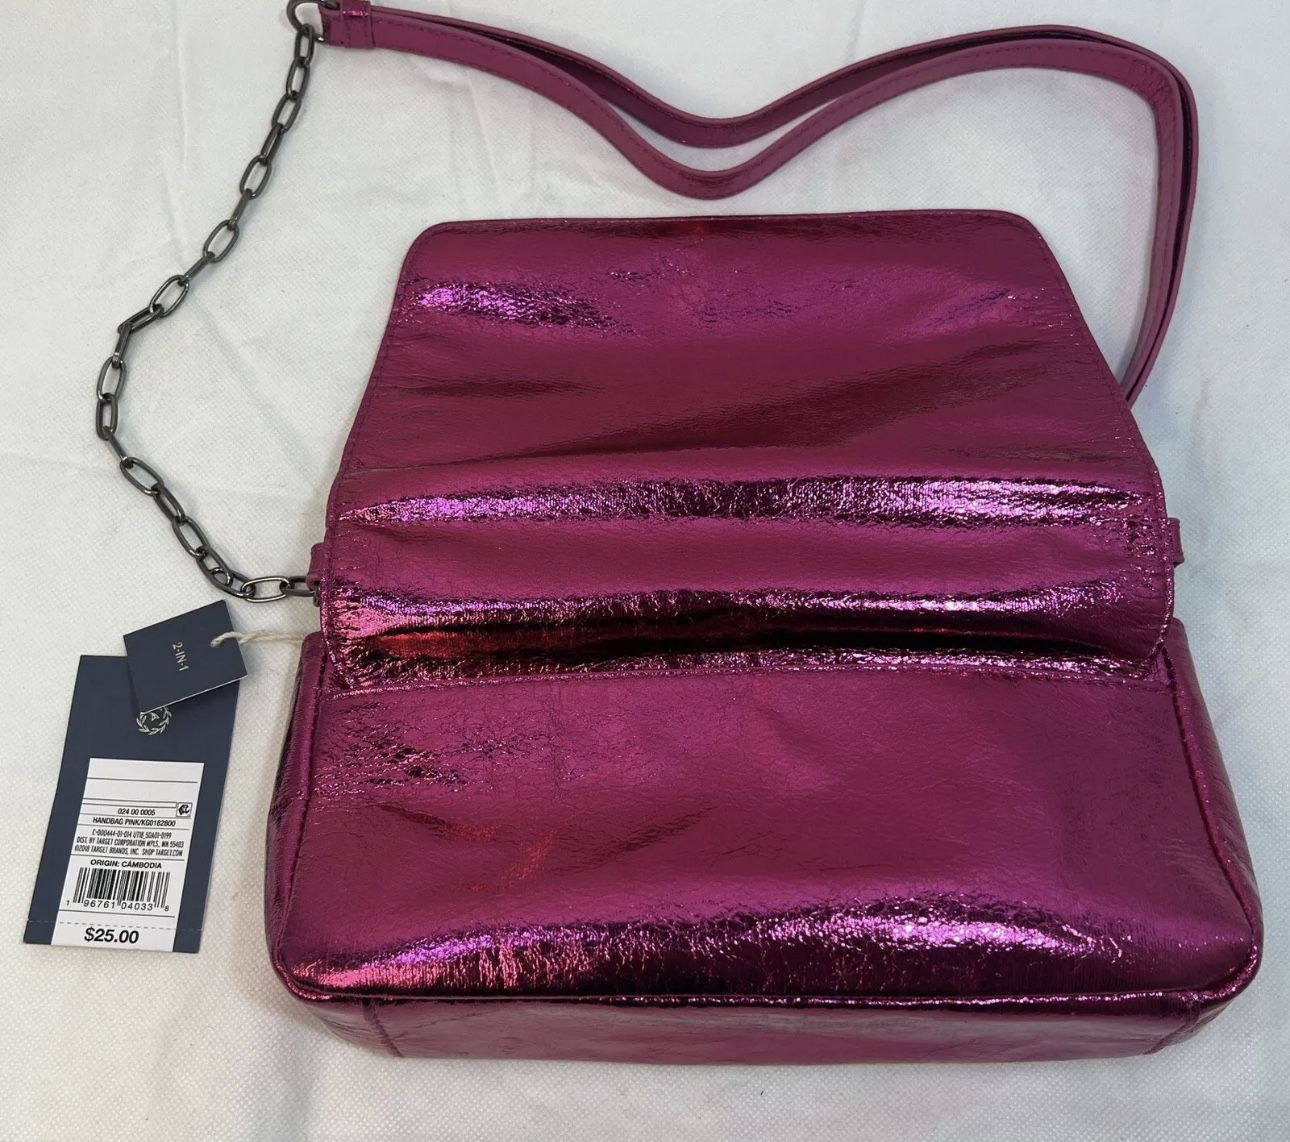 Canvas Crossbody Bag New With Tags for Sale in San Leandro, CA - OfferUp